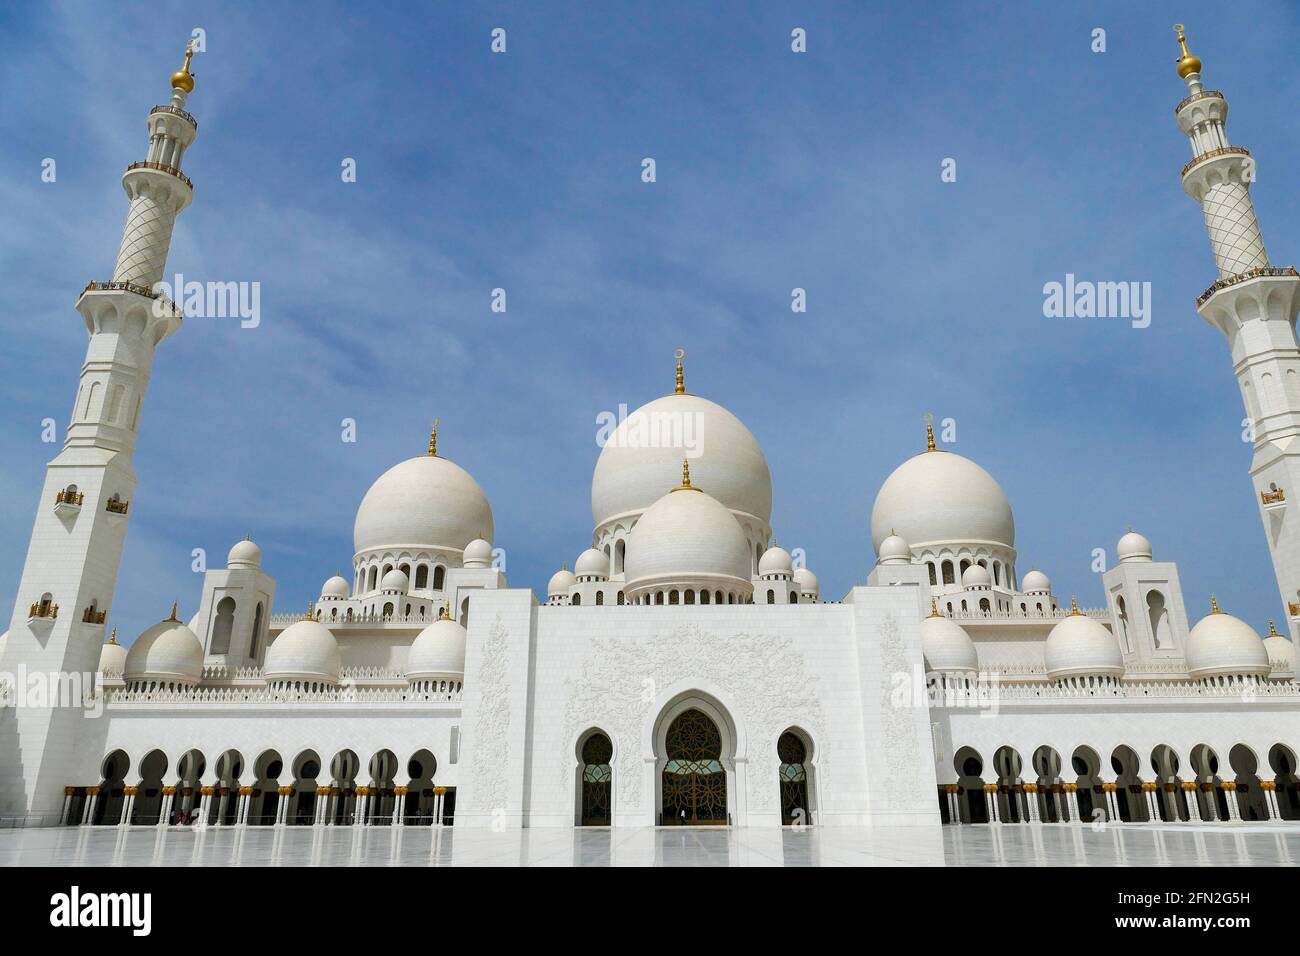 Abu Dhabi, United Arab Emirates, April 13, 2019. Sheikh Zayed Mosque, the largest mosque in the United Arab Emirates and the ninth in the world. Stock Photo